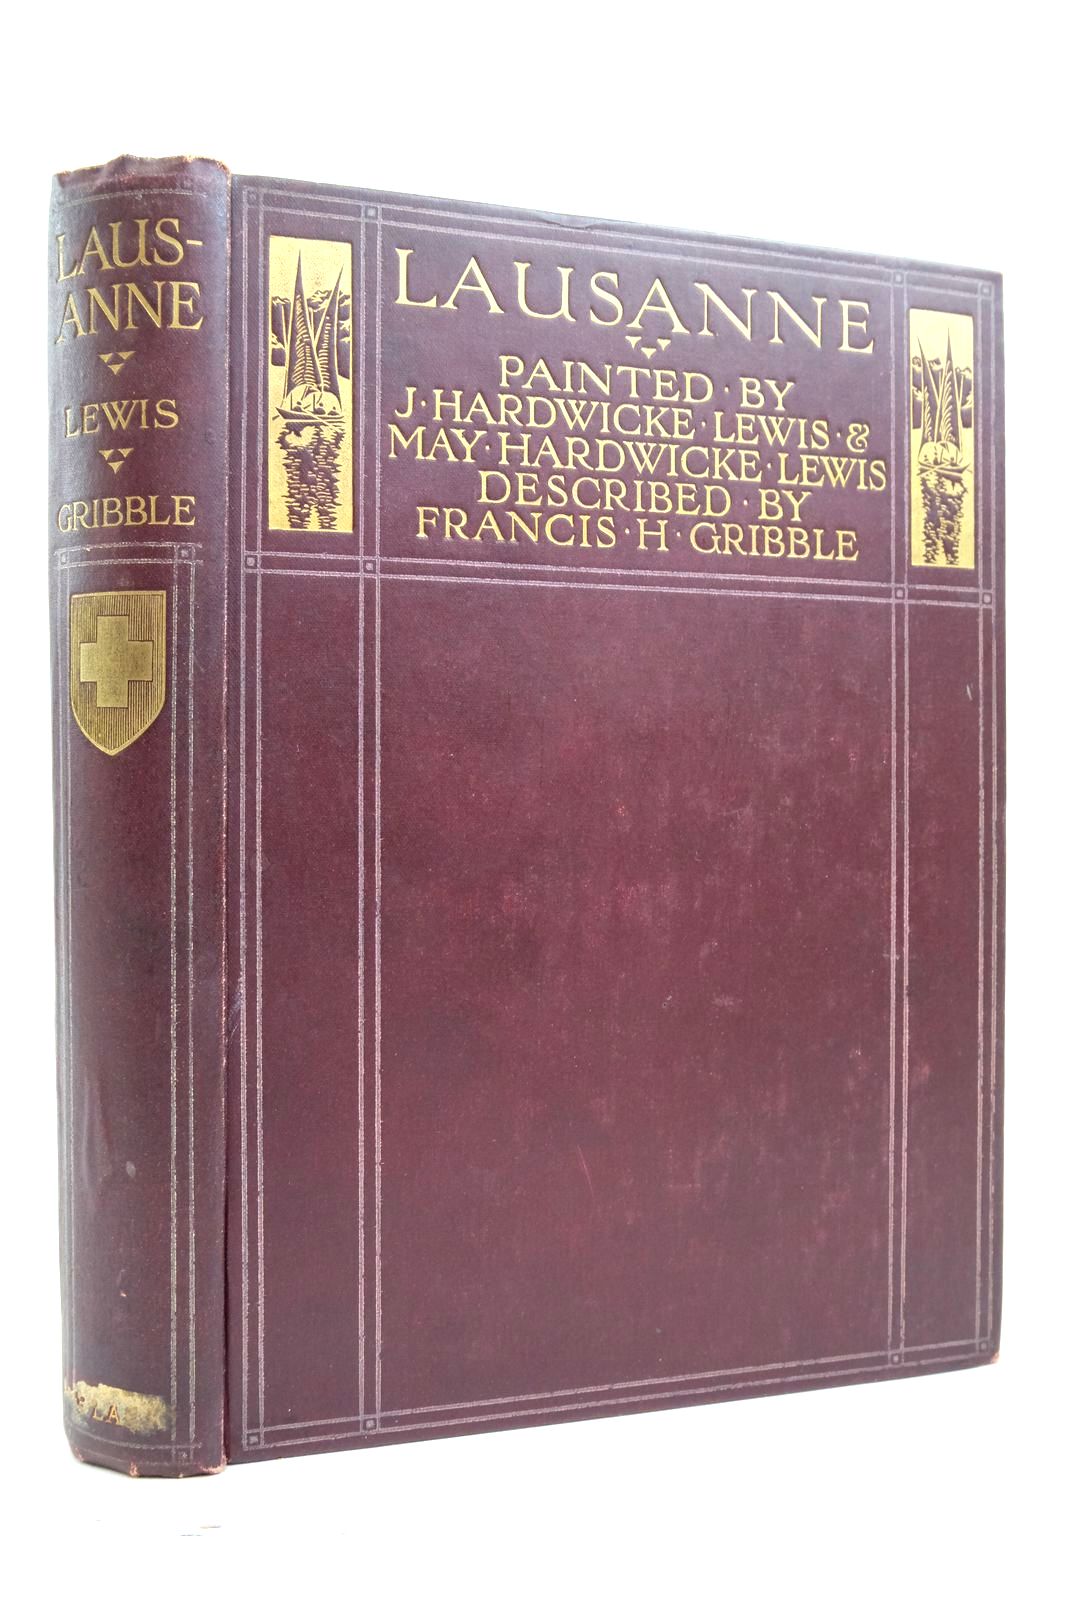 Photo of LAUSANNE written by Gribble, Francis illustrated by Lewis, J. Hardwicke
Lewis, May Hardwicke published by Adam & Charles Black (STOCK CODE: 2137080)  for sale by Stella & Rose's Books